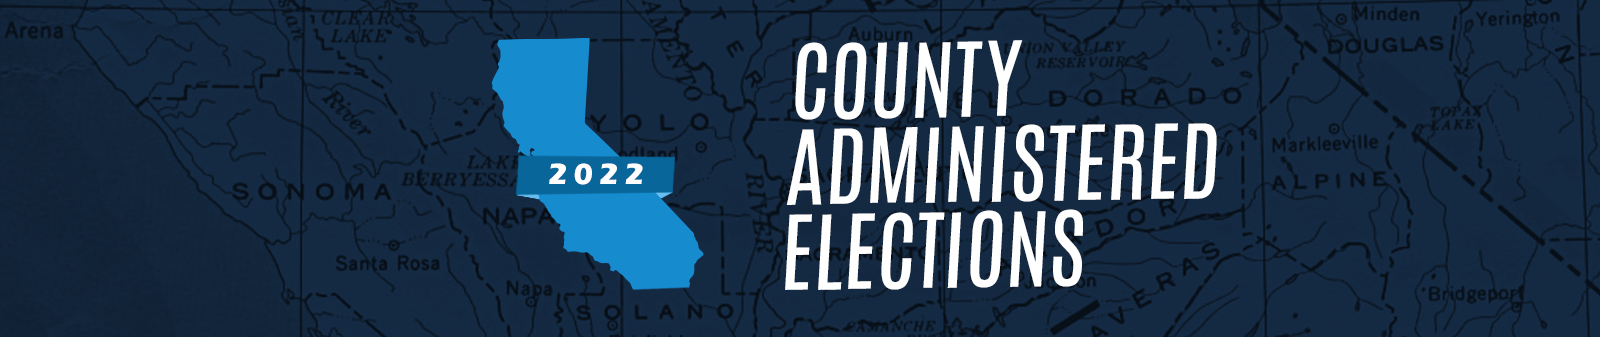 County Elections Administration Banner